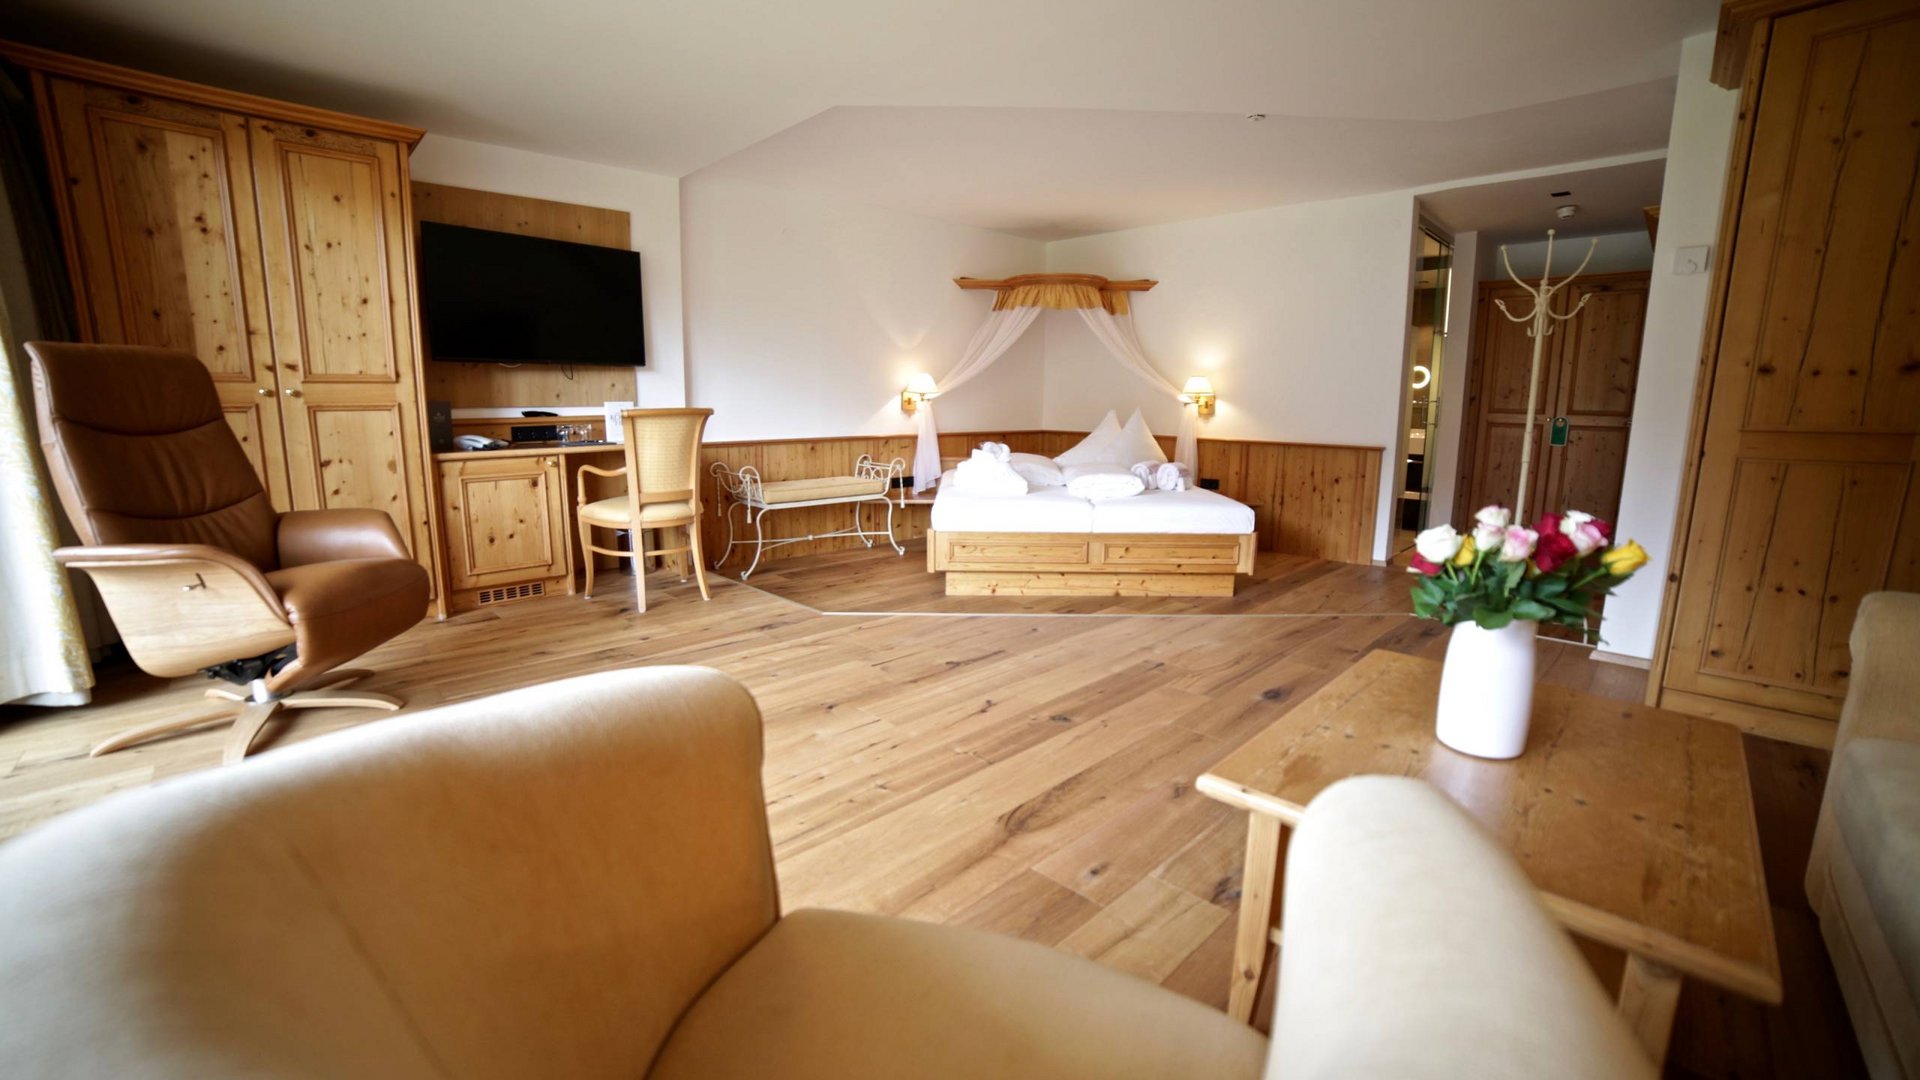 The Jesacherhof, your accommodation in East Tyrol